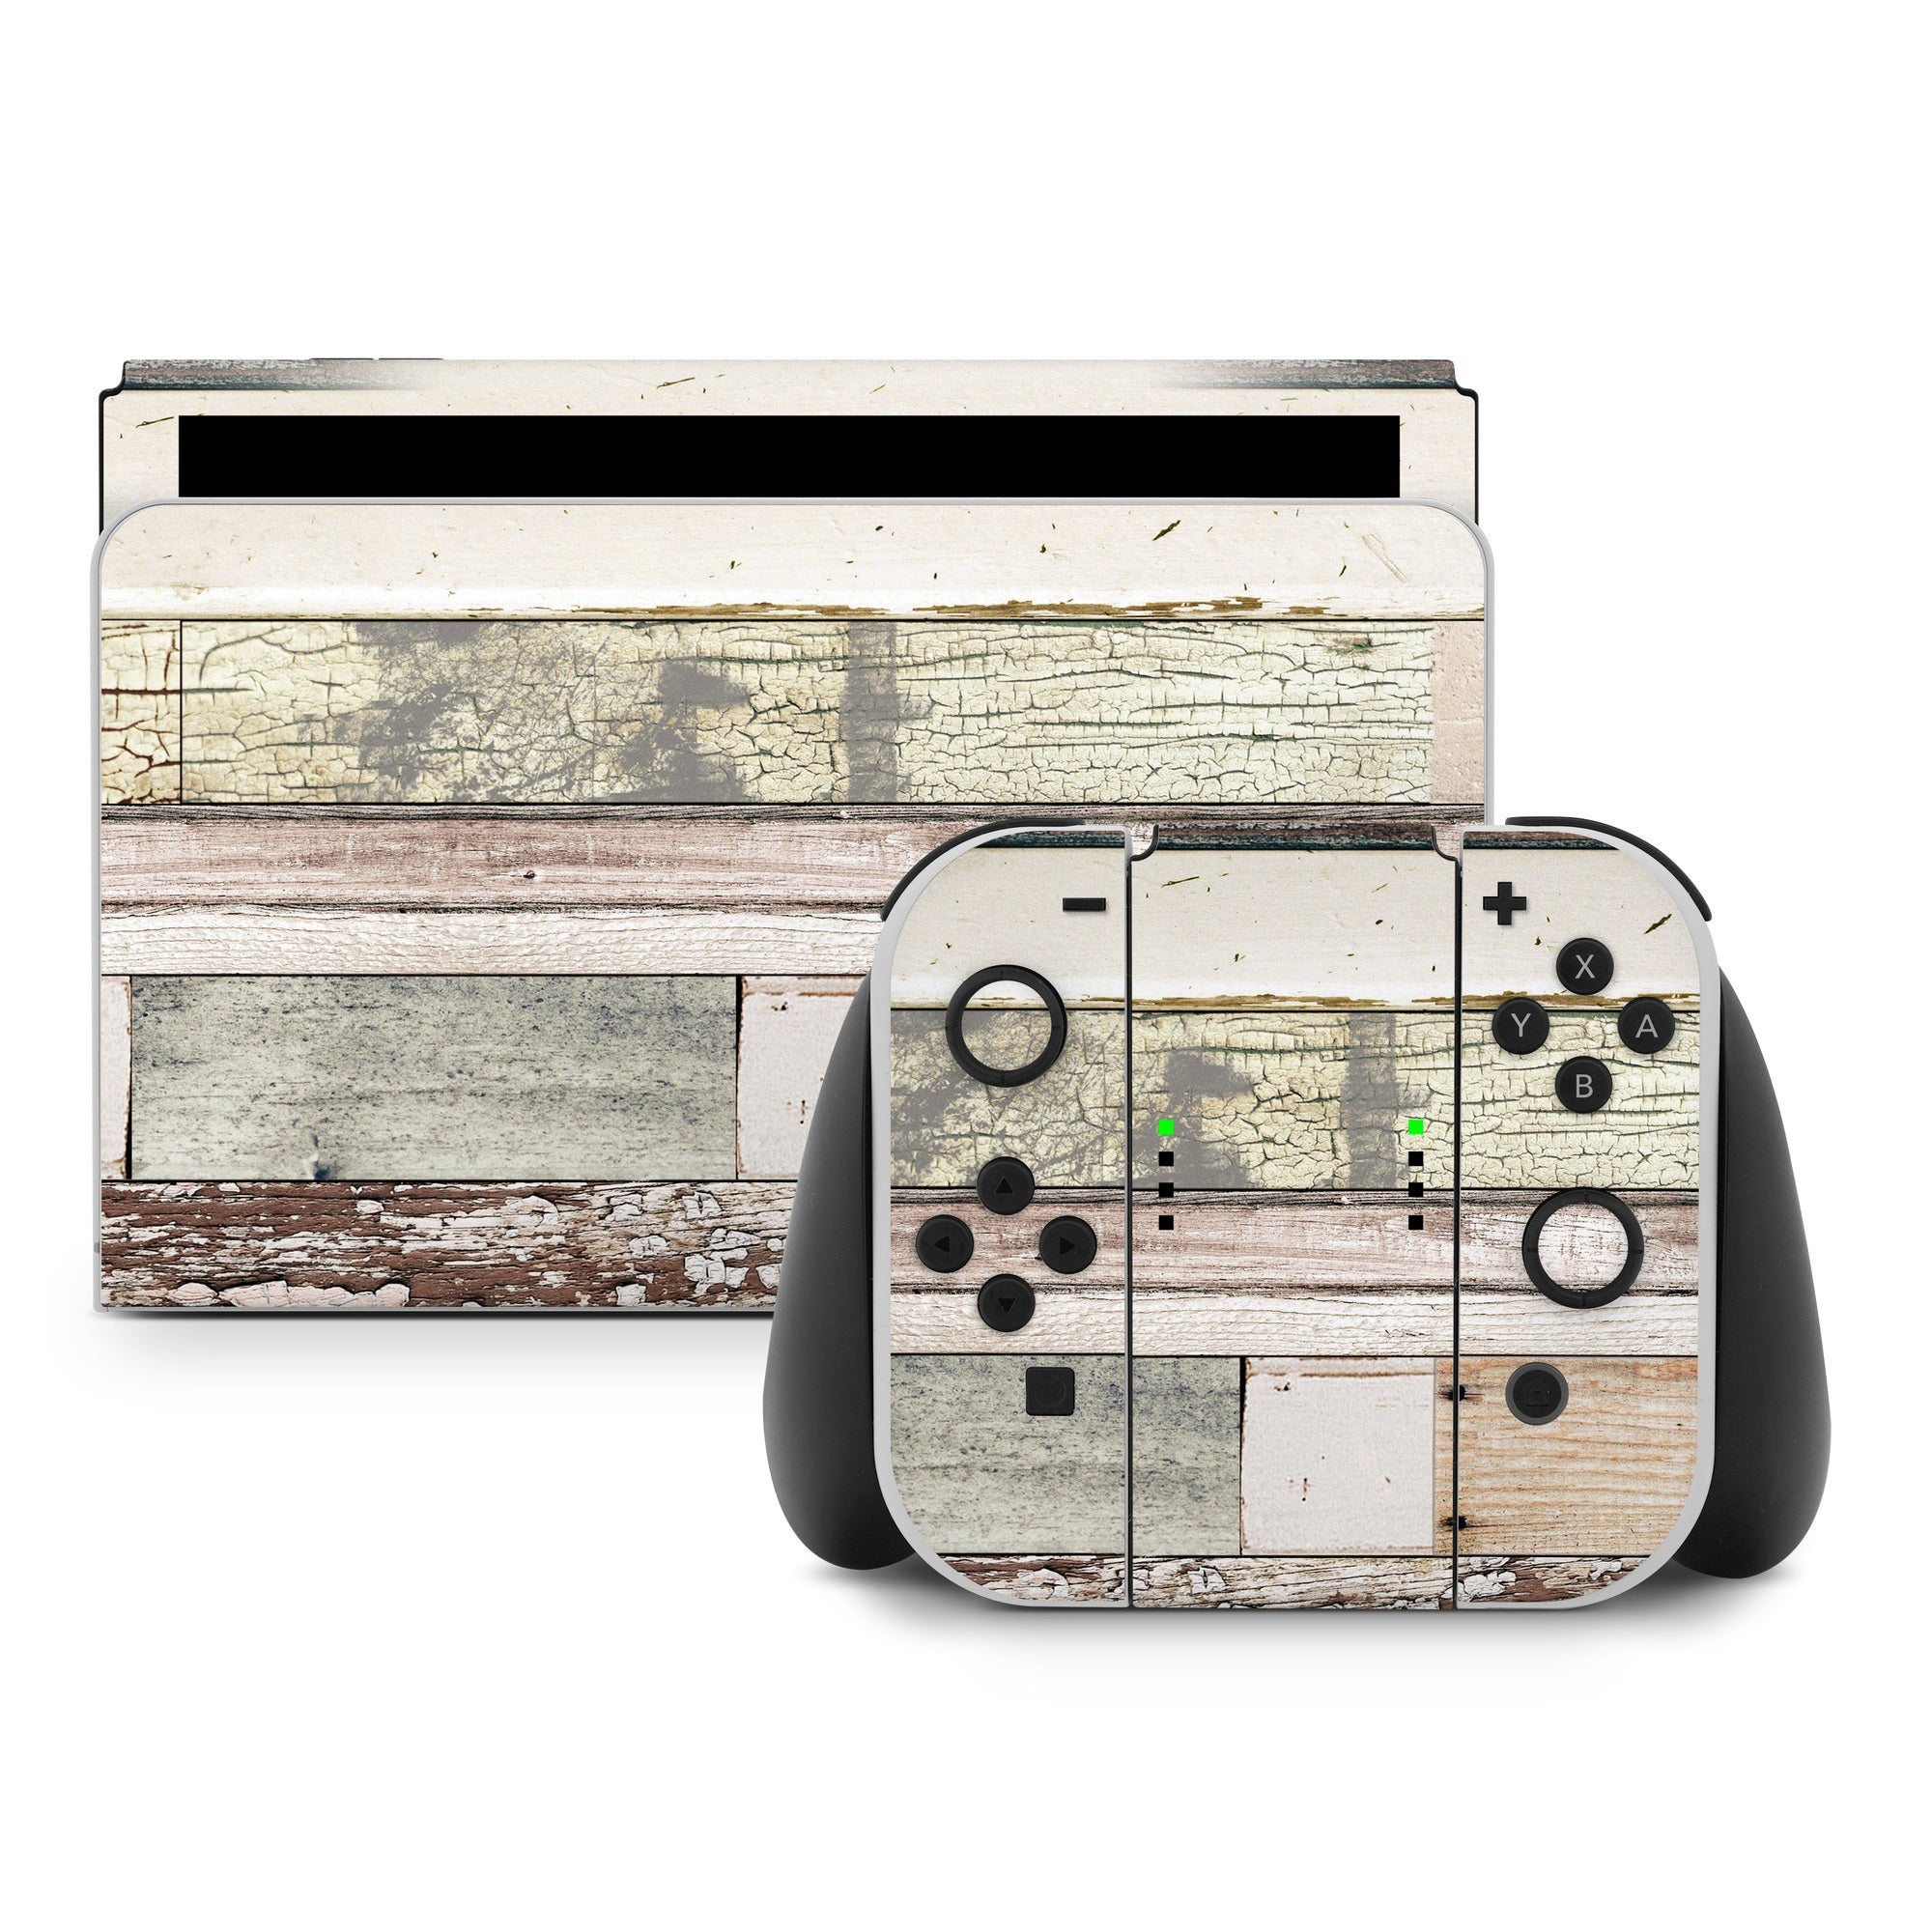 Eclectic Wood - Nintendo Switch Skin